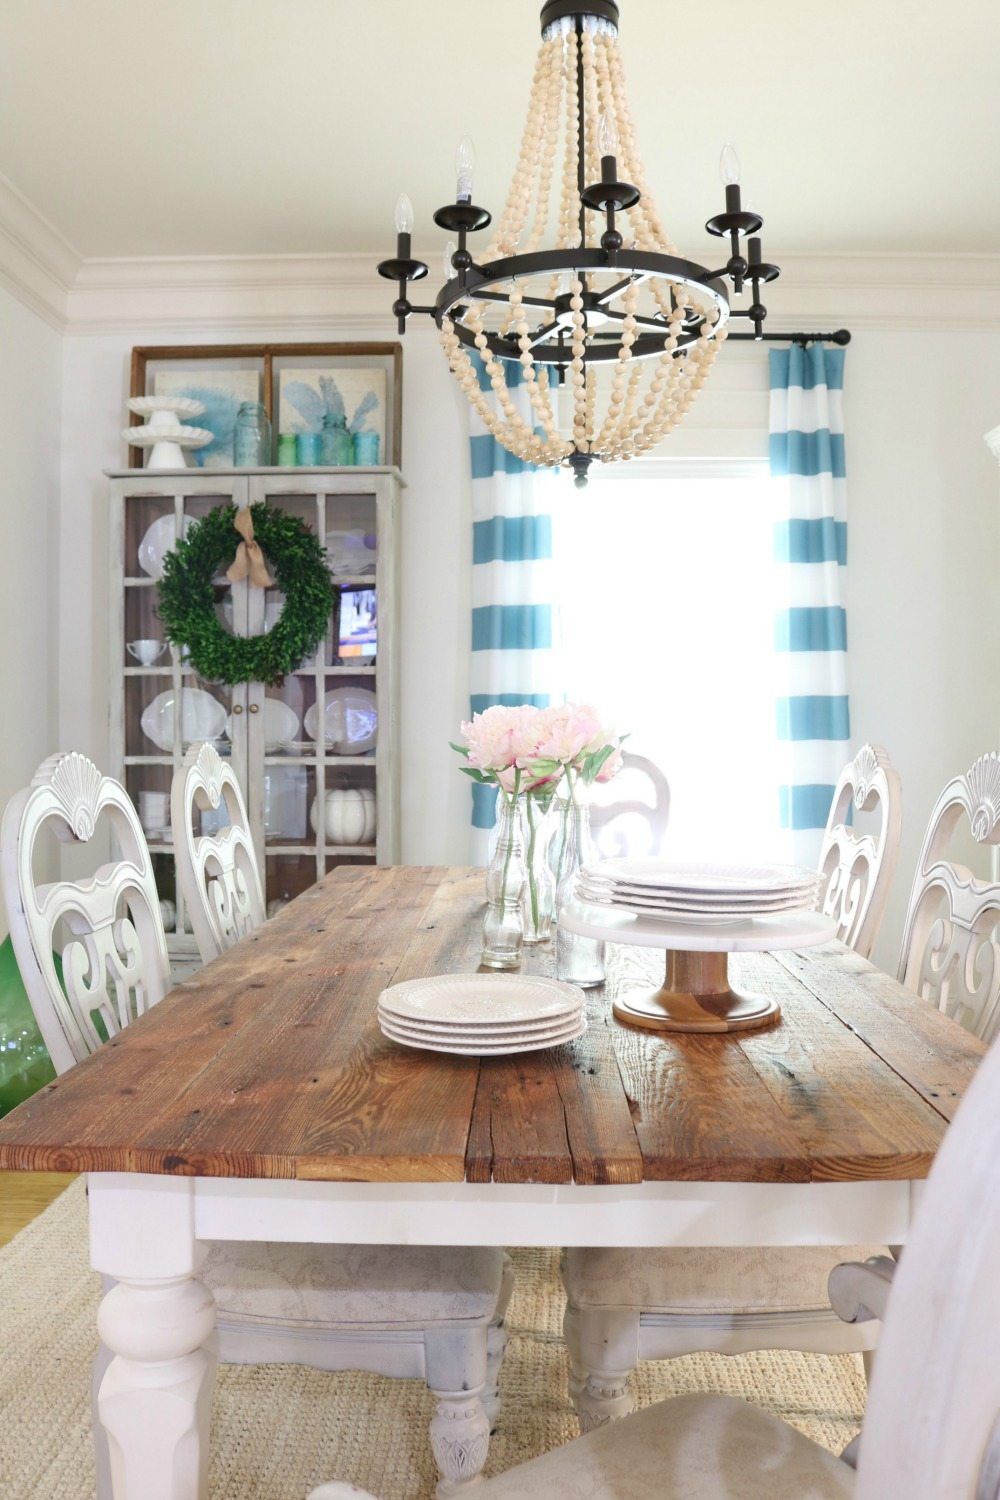 Barnwood table and striped curtains in the dining room